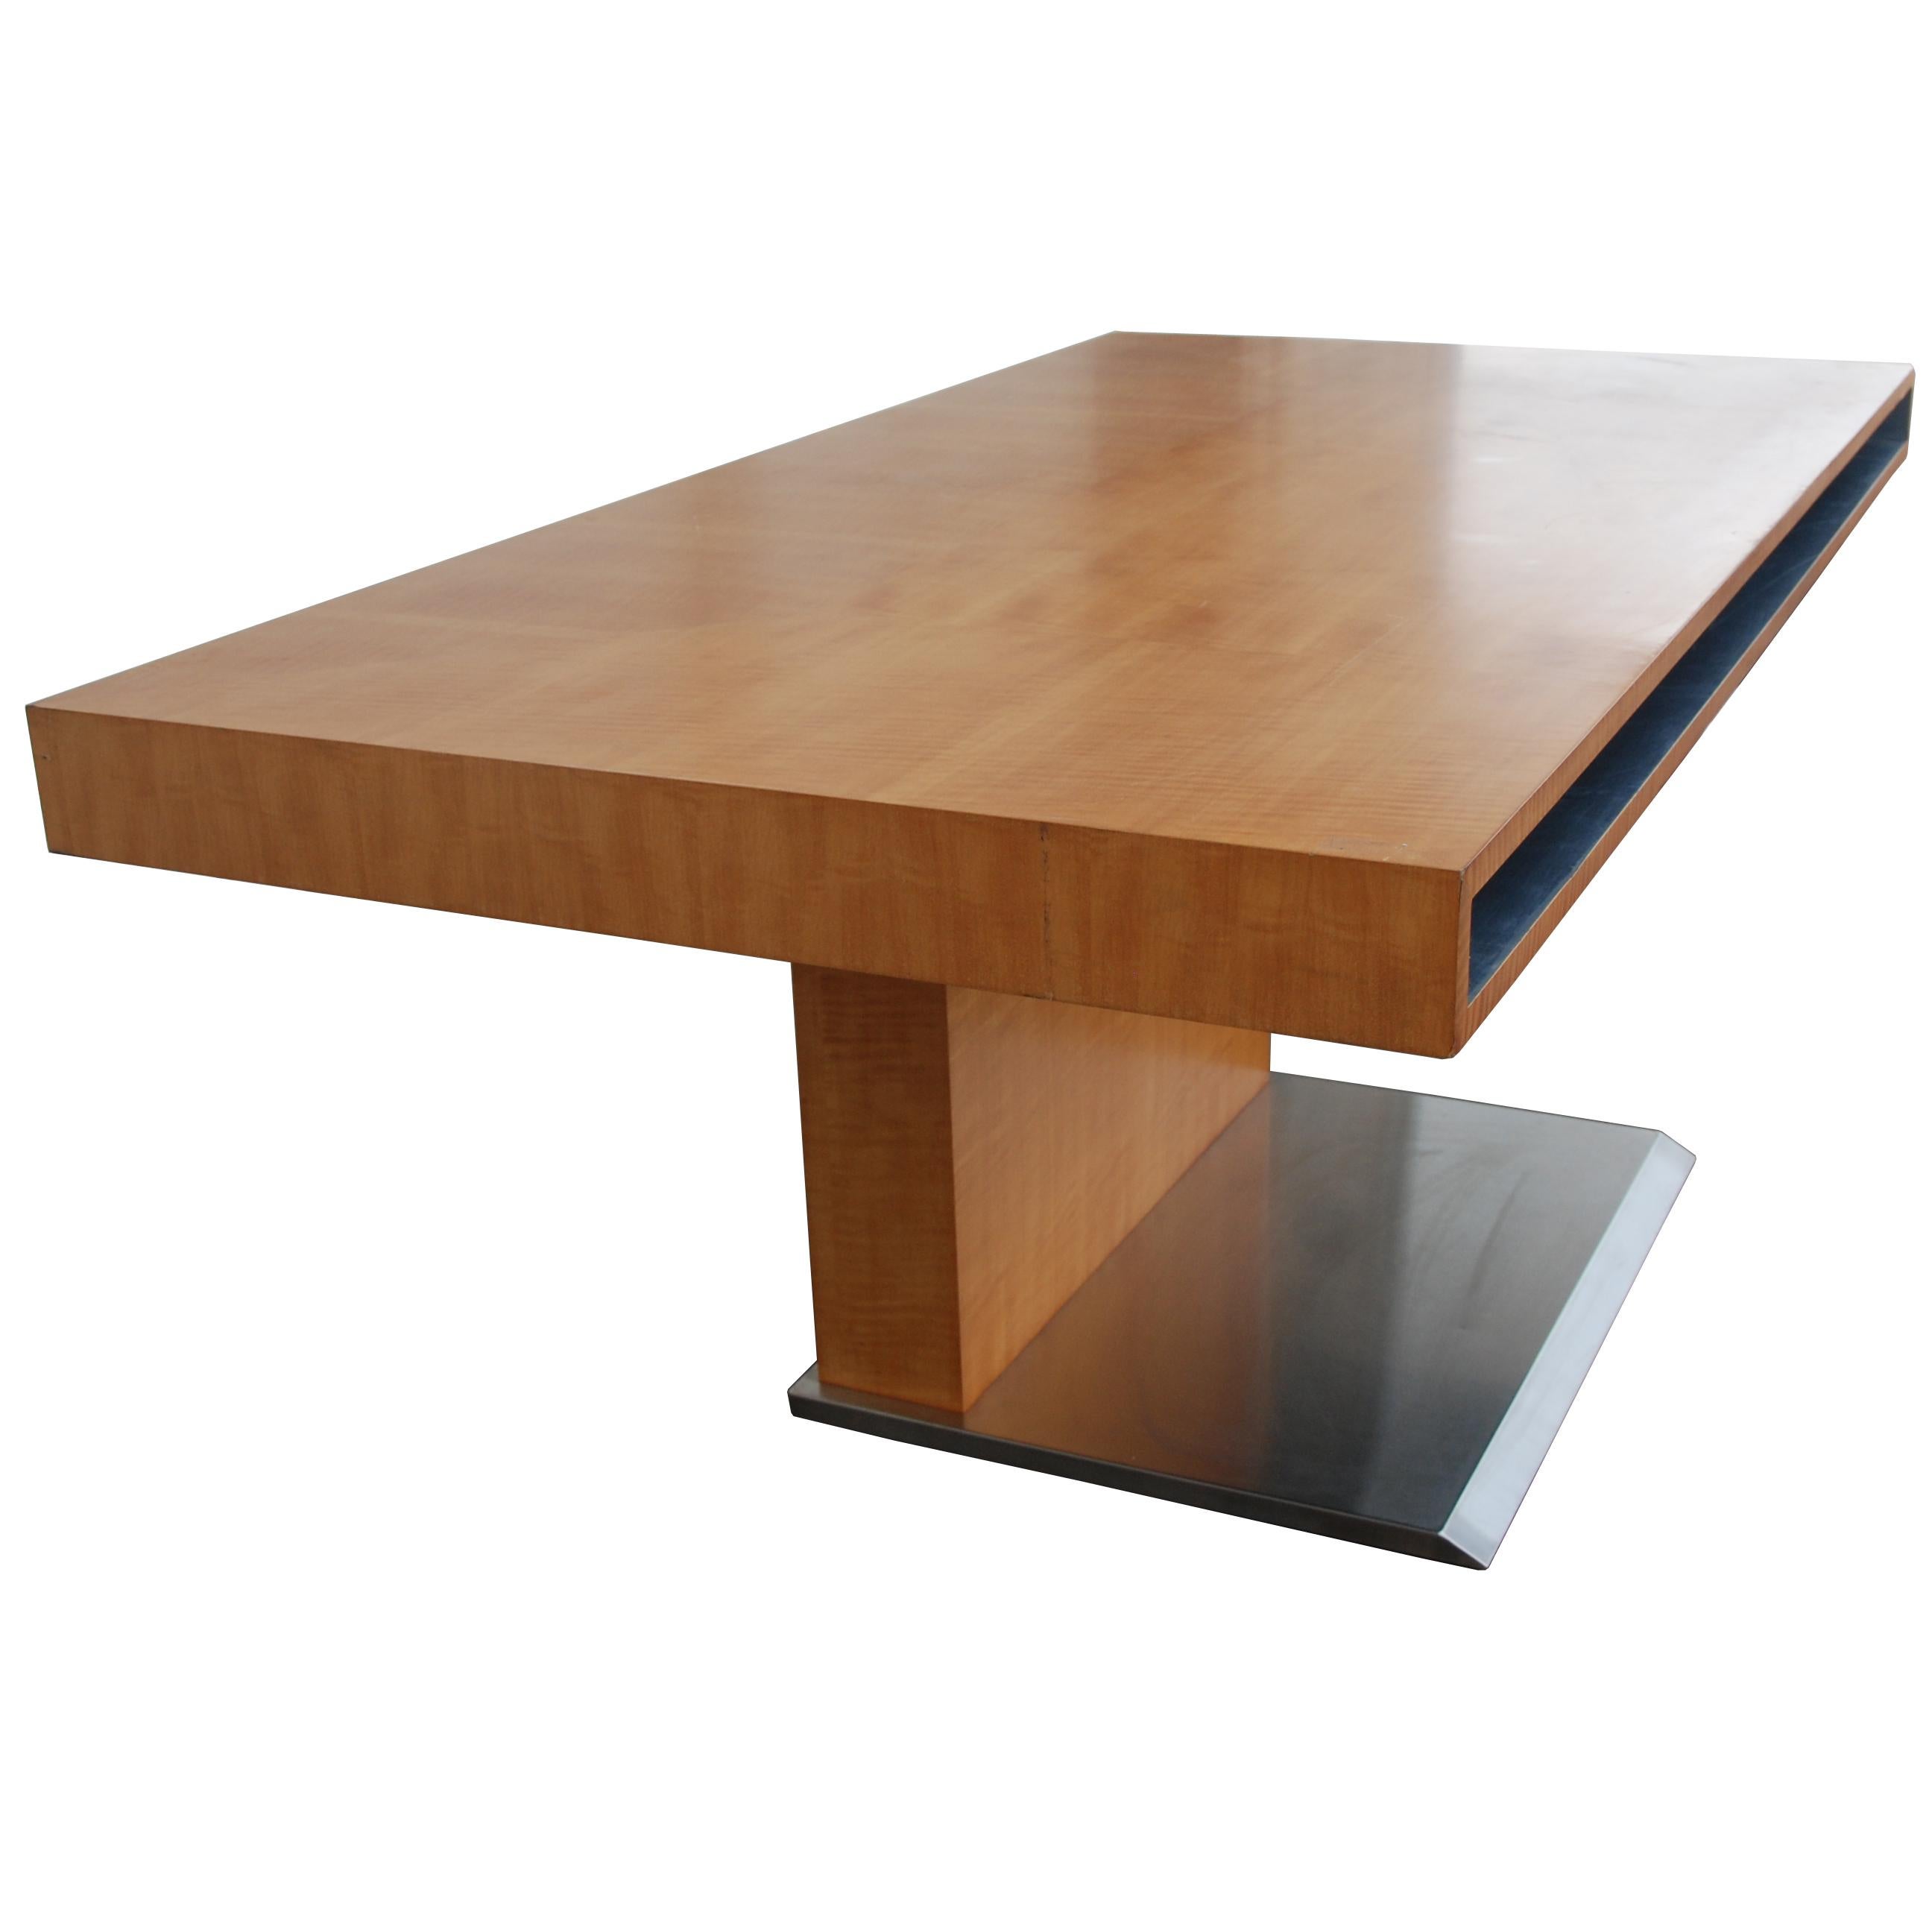 Bernhardt Pedestal desk in the style of Warren Platner

Minimalist writing table or desk in the style of Warren Platner for Bernhardt 1970s. Steel framed base supports a curly maple pedestal and top. 
Features storage cubbies.

See credenza